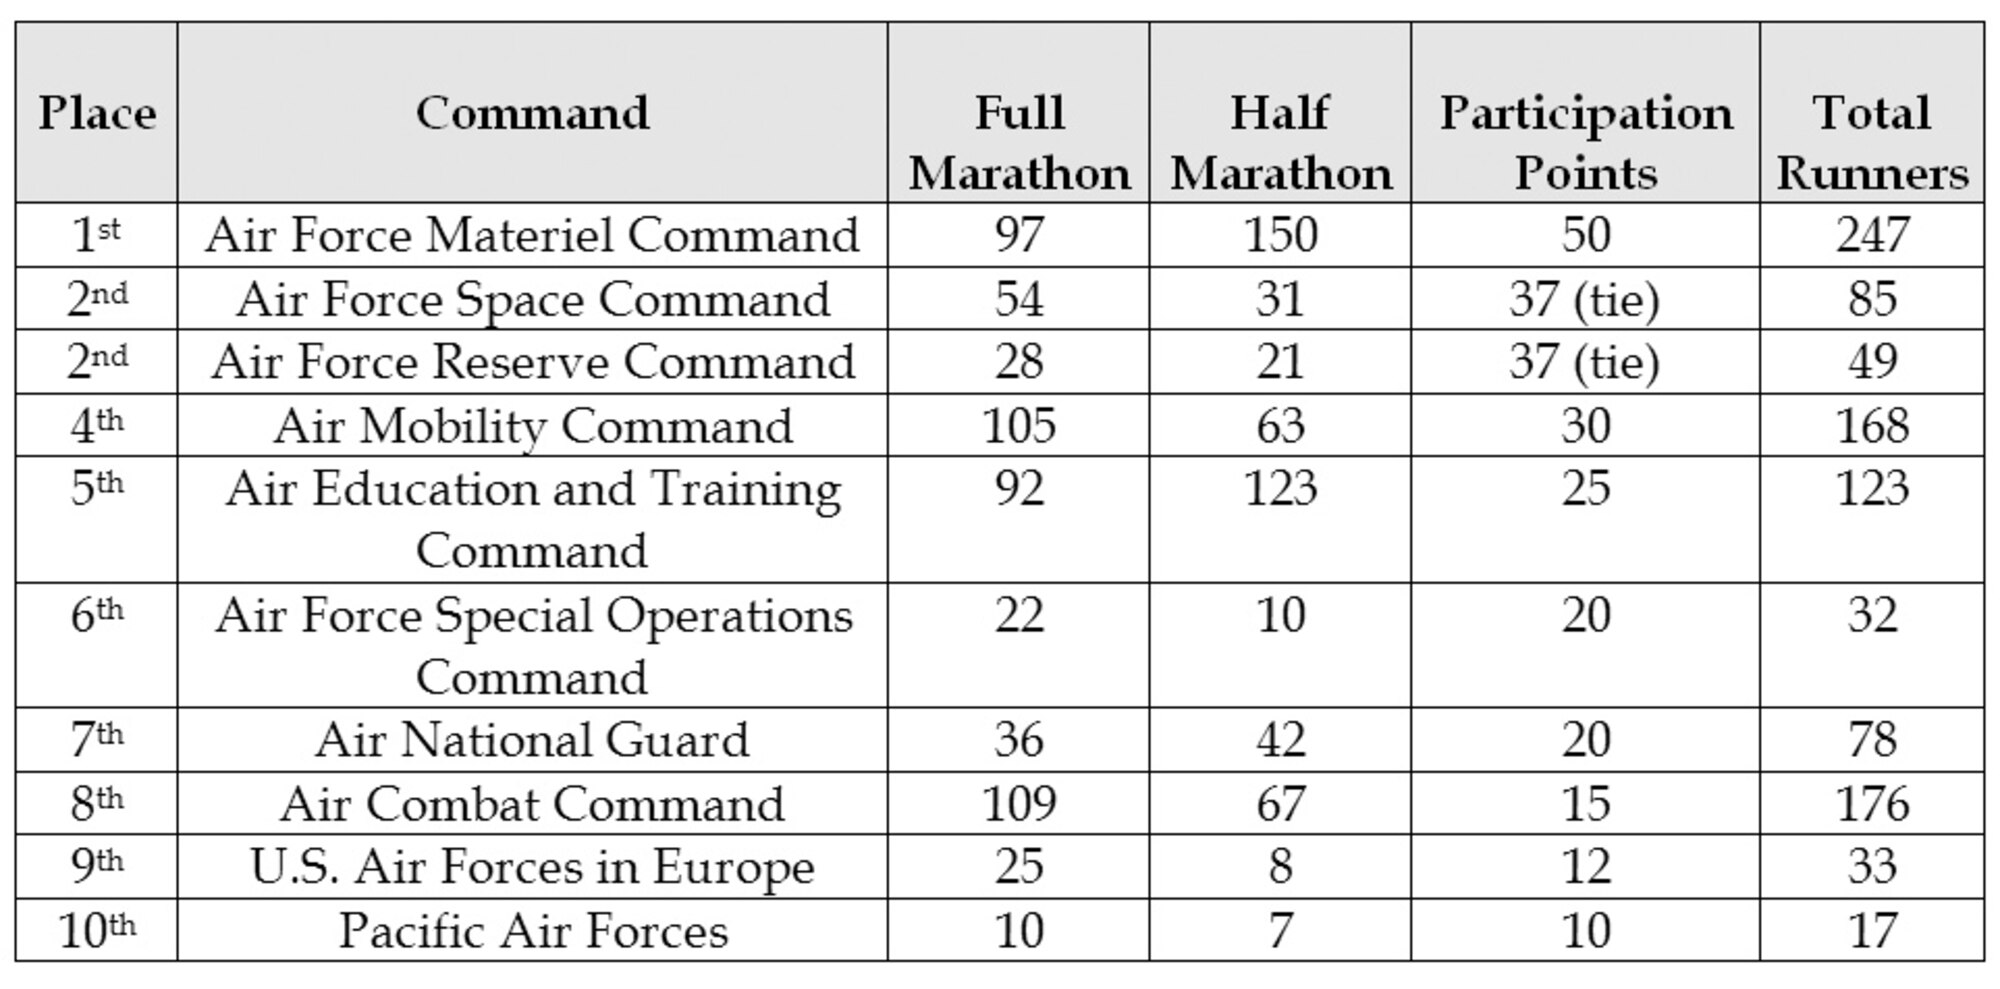 This table outlines the results for Air Force major command and Air National Guard runners in the 2008 Air Force Marathon.